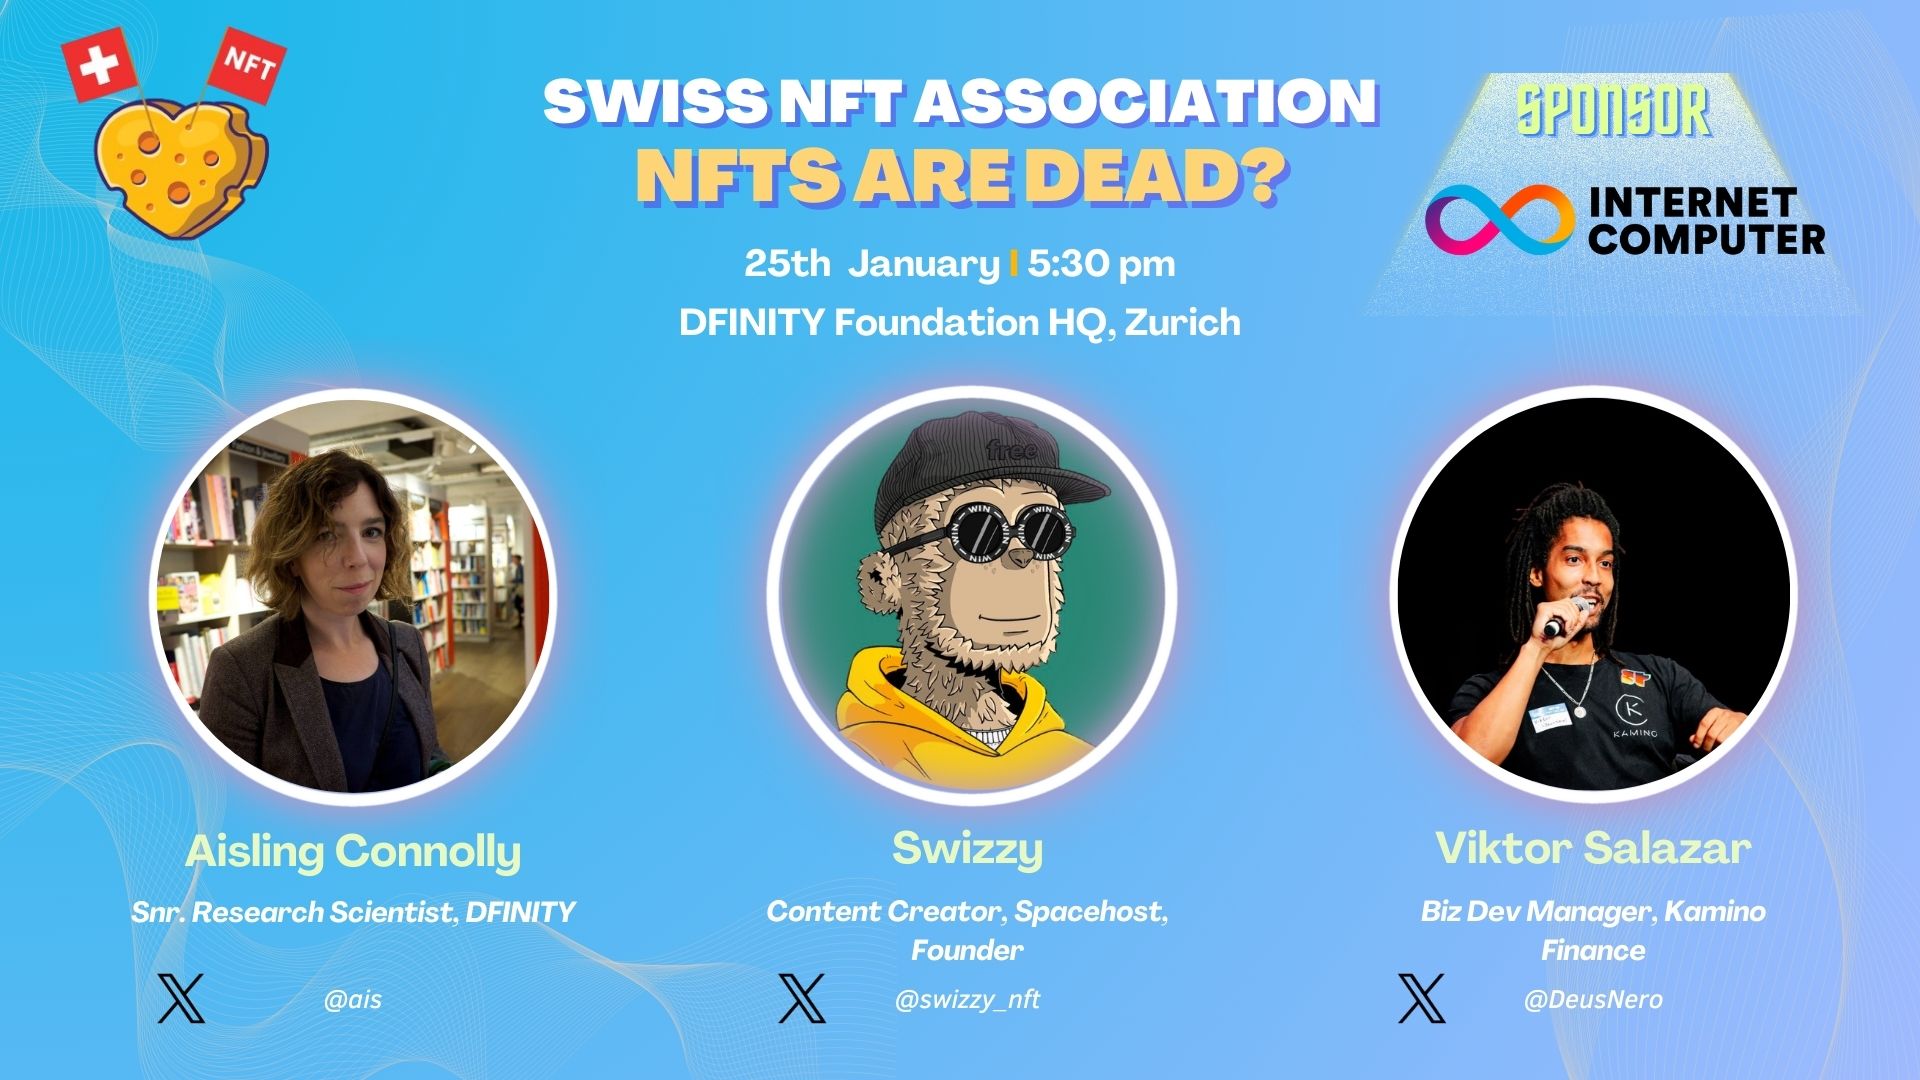 NFTs are Dead?